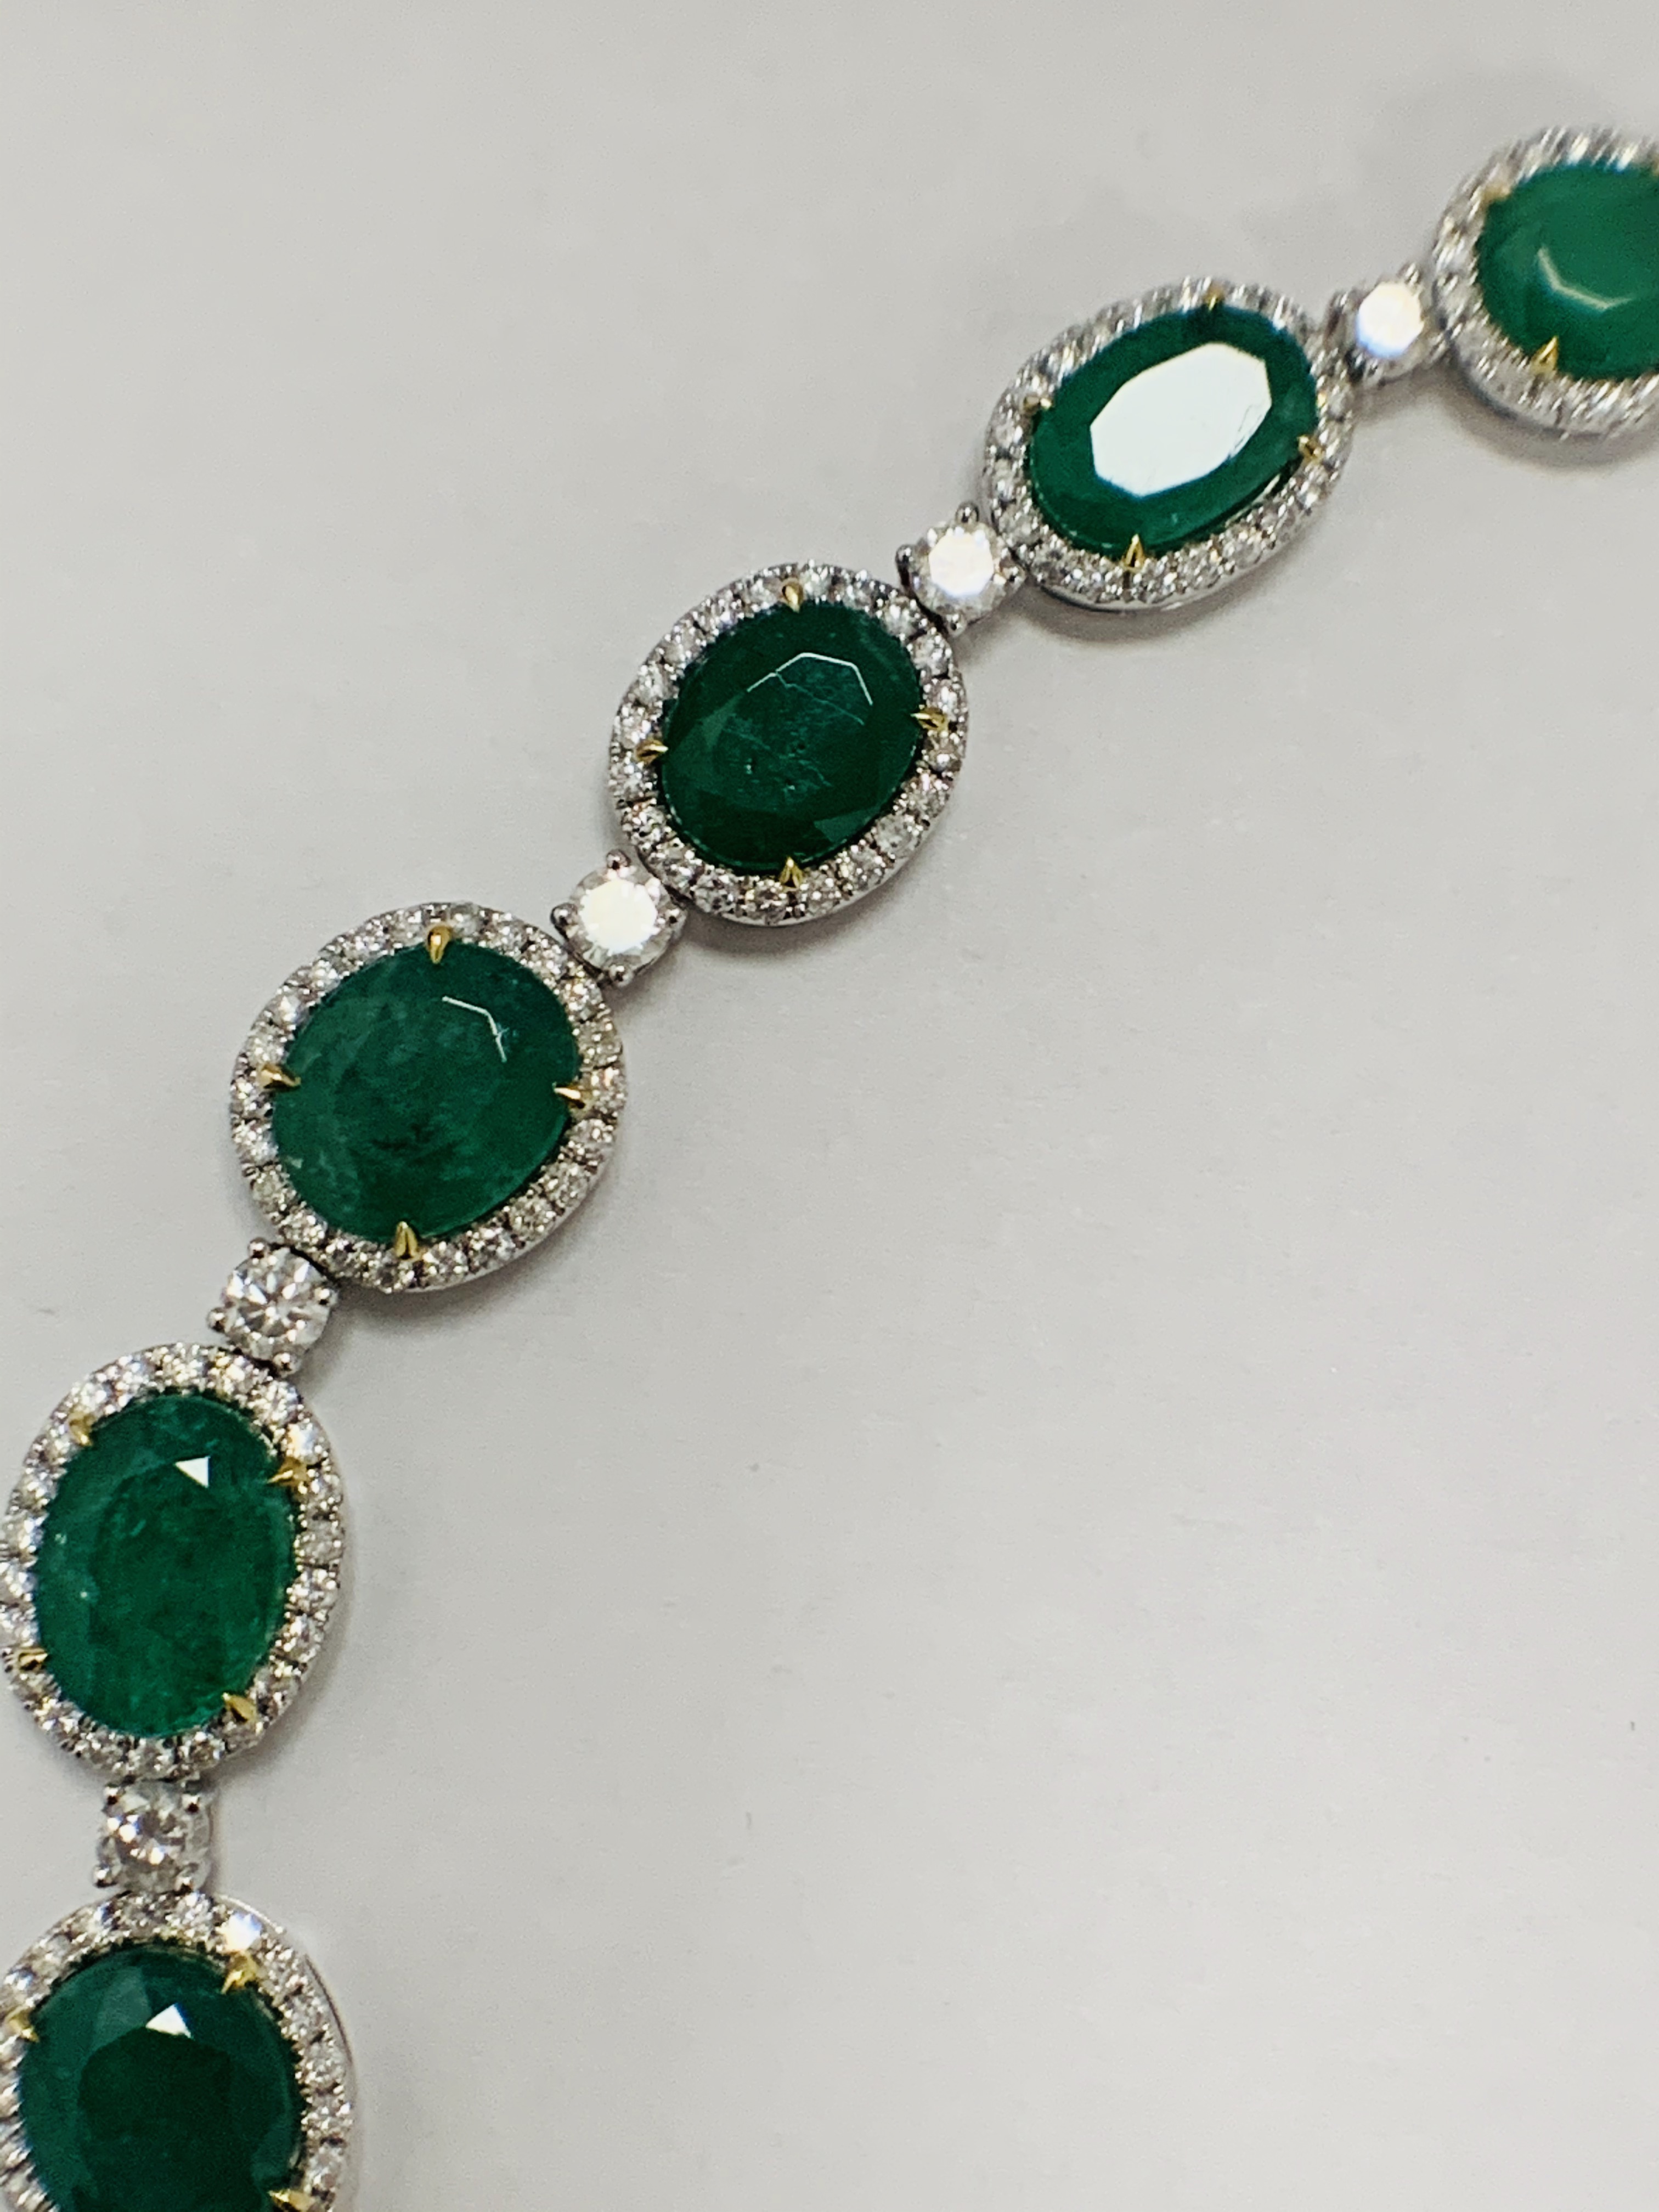 Platinum and Yellow Gold Emerald and Diamond necklace featuring, 29 oval cut, light to deep green Em - Image 24 of 36